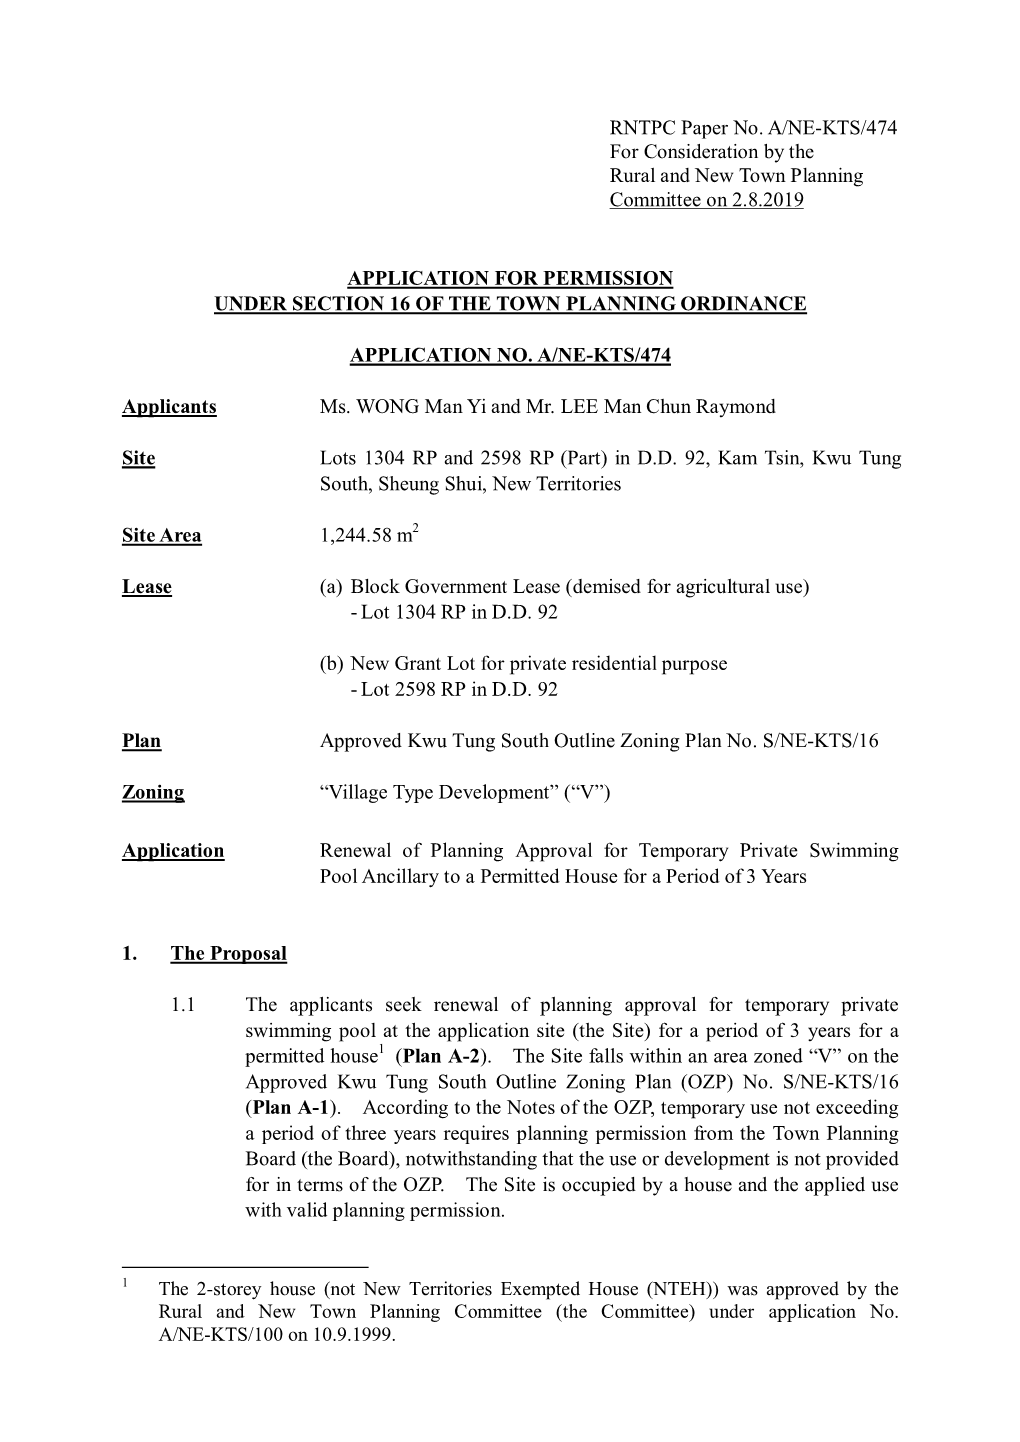 Application for Permission Under Section 16 of the Town Planning Ordinance